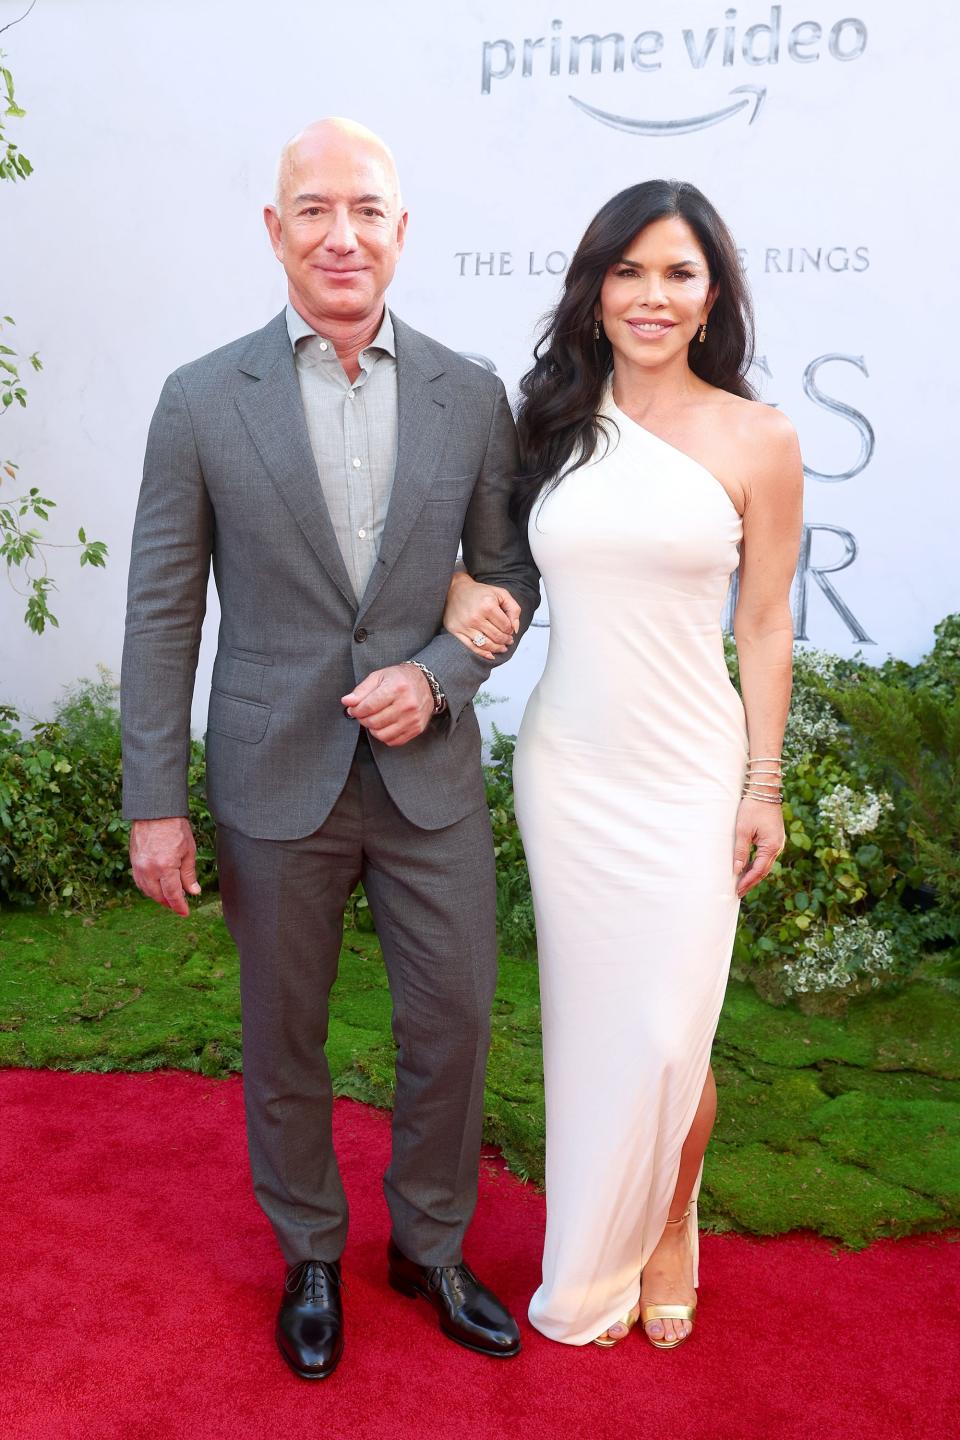 Jeff Bezos and Lauren Sanchez attend the premiere of "The Lord Of The Rings: The Rings Of Power" in August 2022.